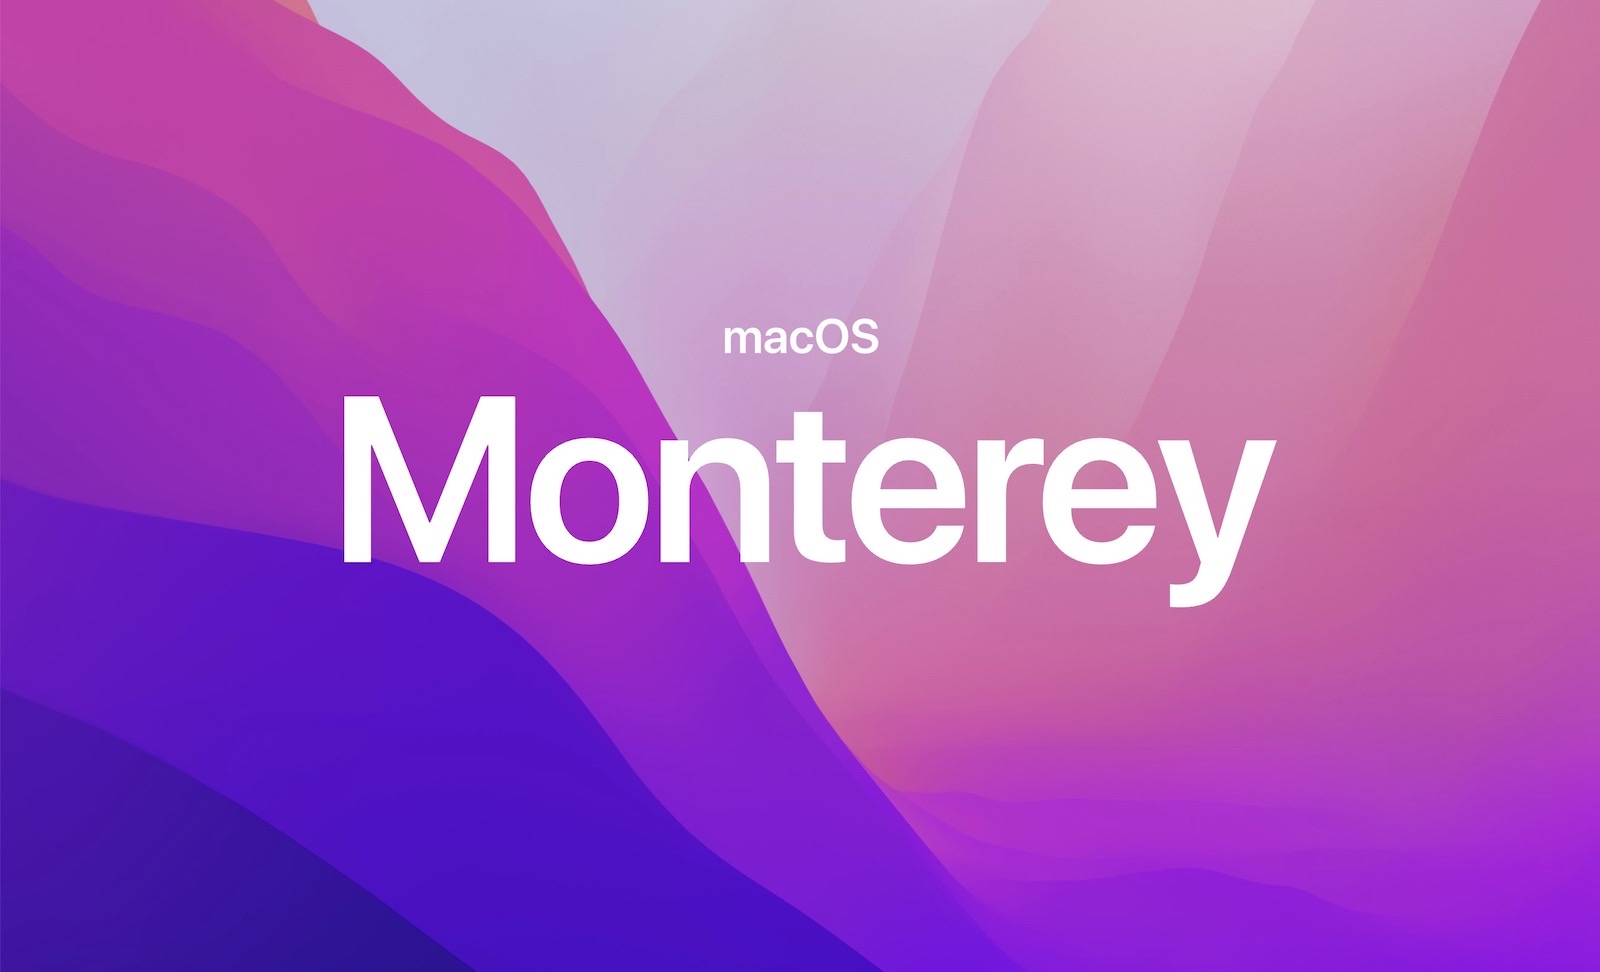 Macos monterey official release